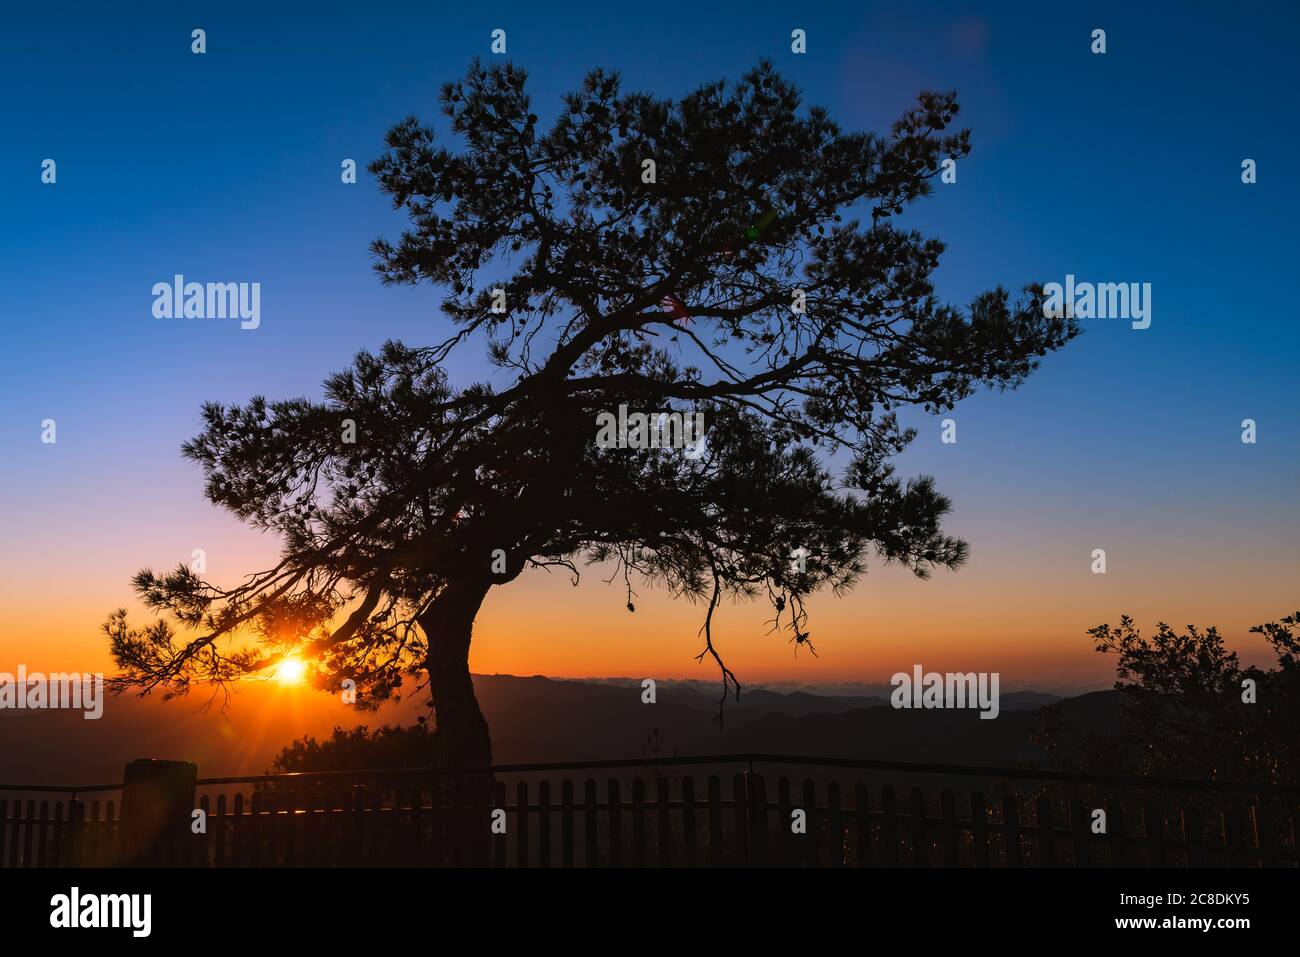 Silhouette of a forest pine tree during blue hour with bright sun at sunset. Stock Photo